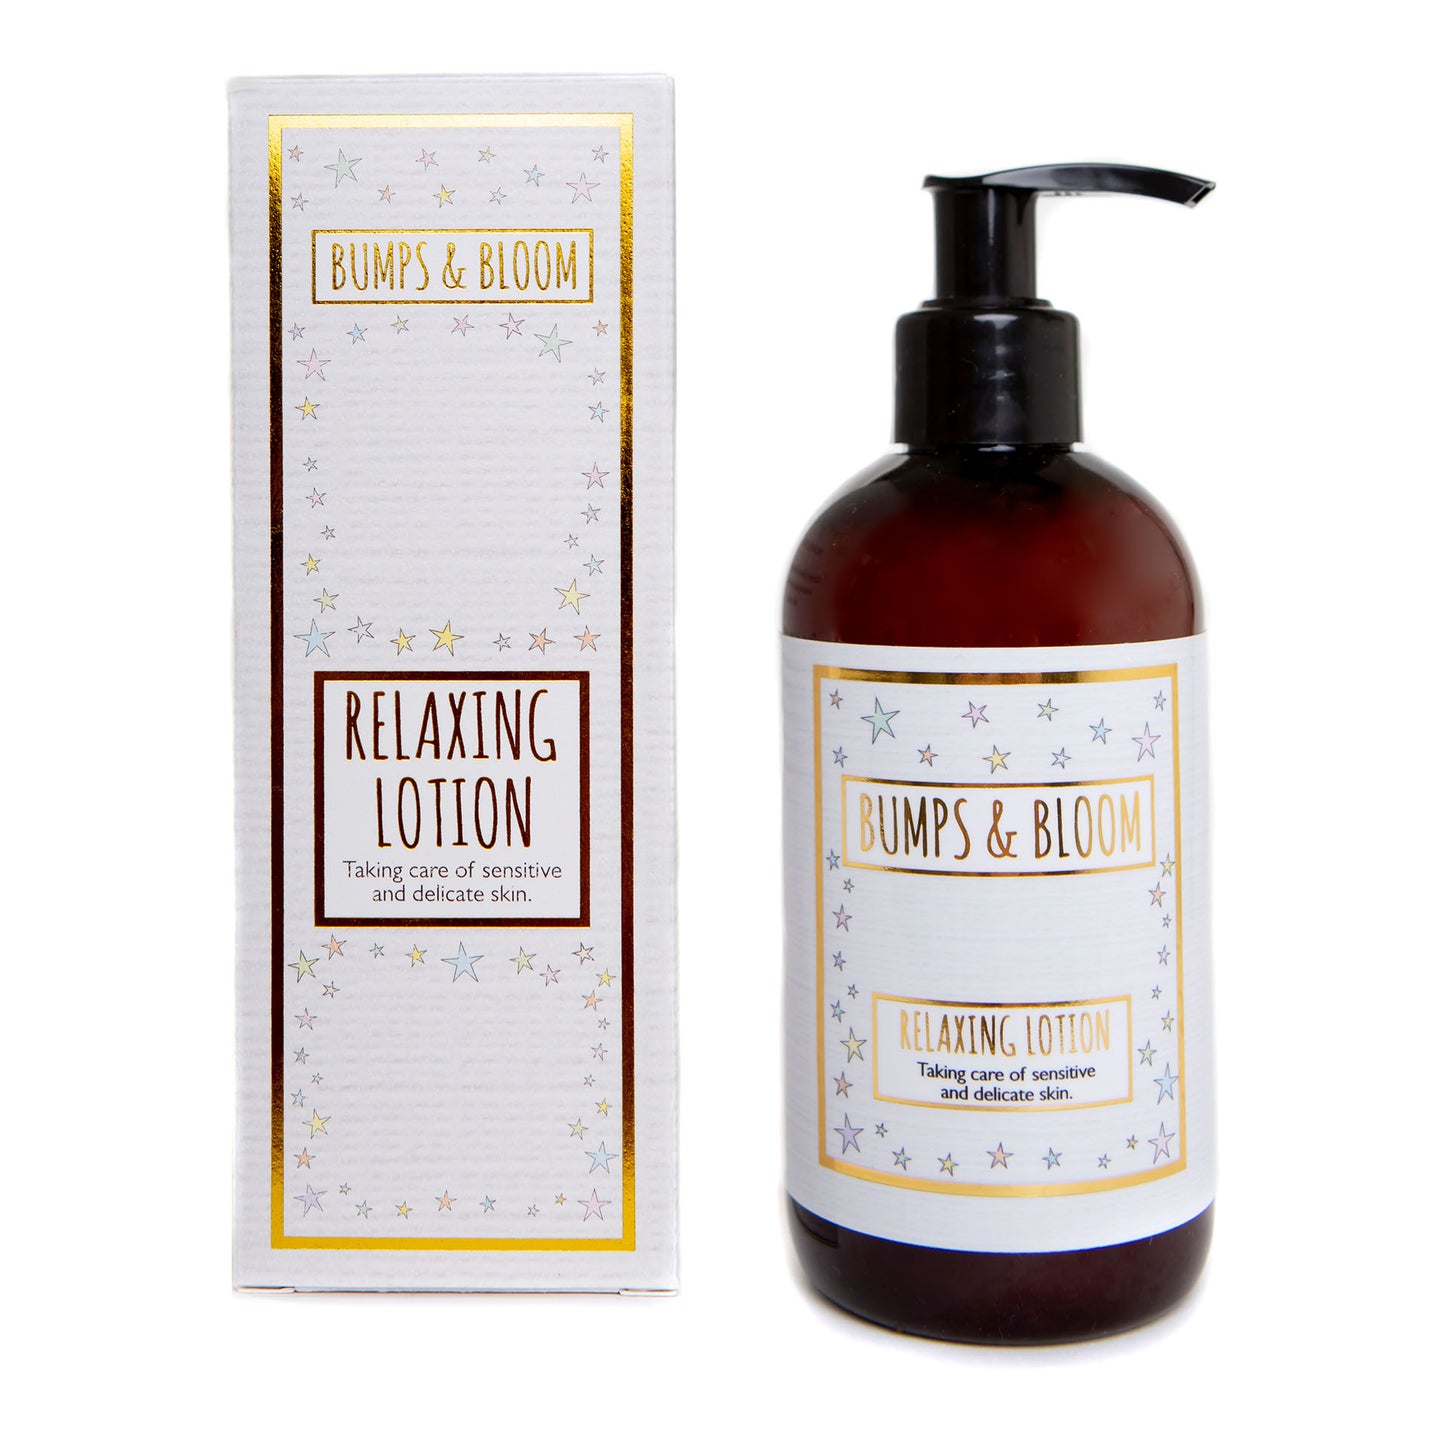 Bumps & Bloom Relaxing Lotion